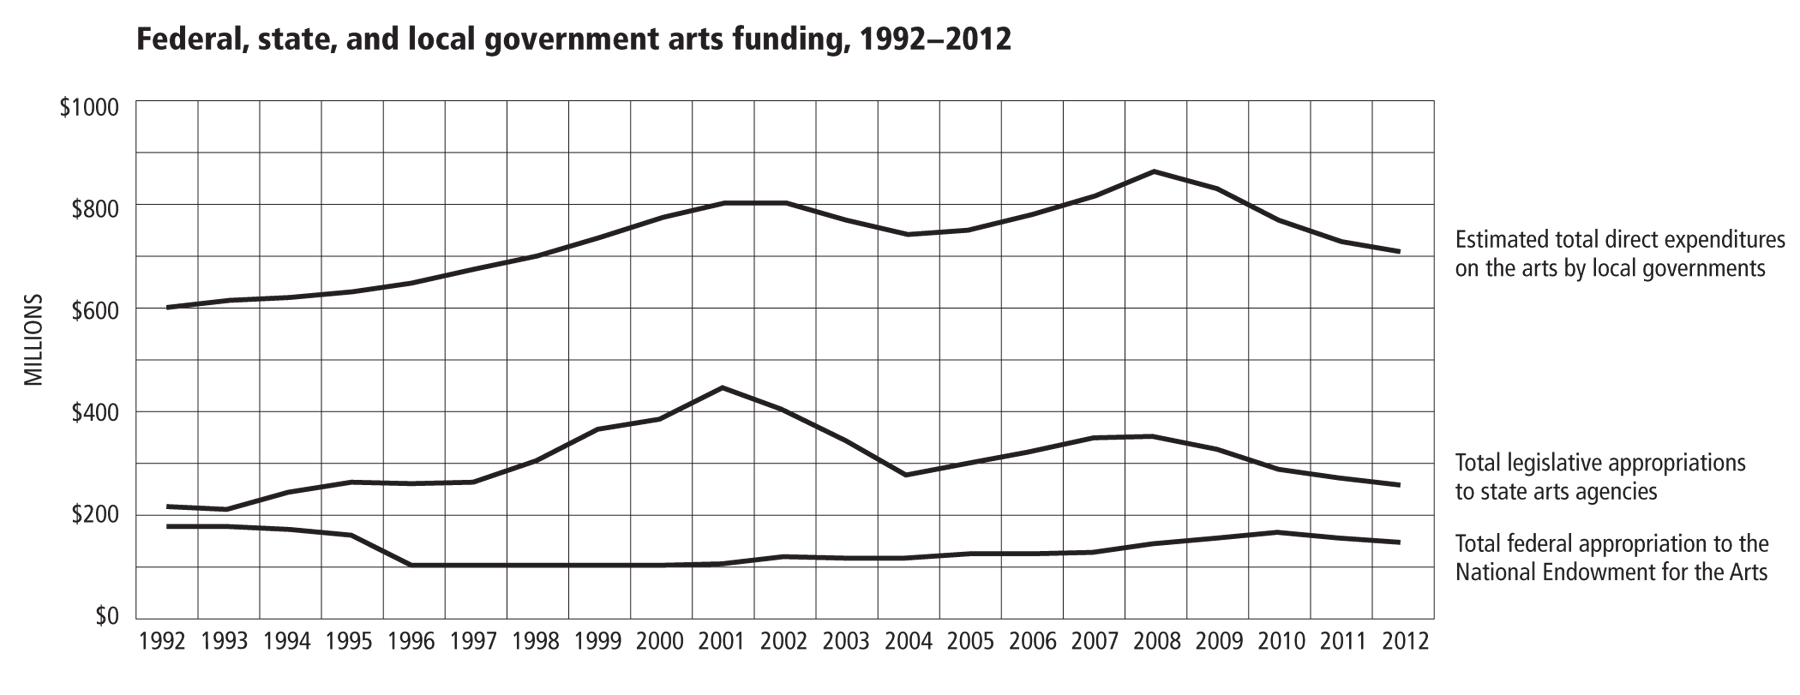 Nov 2, 2012. The National Endowment for the Arts (NEA) is a U.S. government agency that  provides funding for art projects. In 2004, it had a budget of $121 .